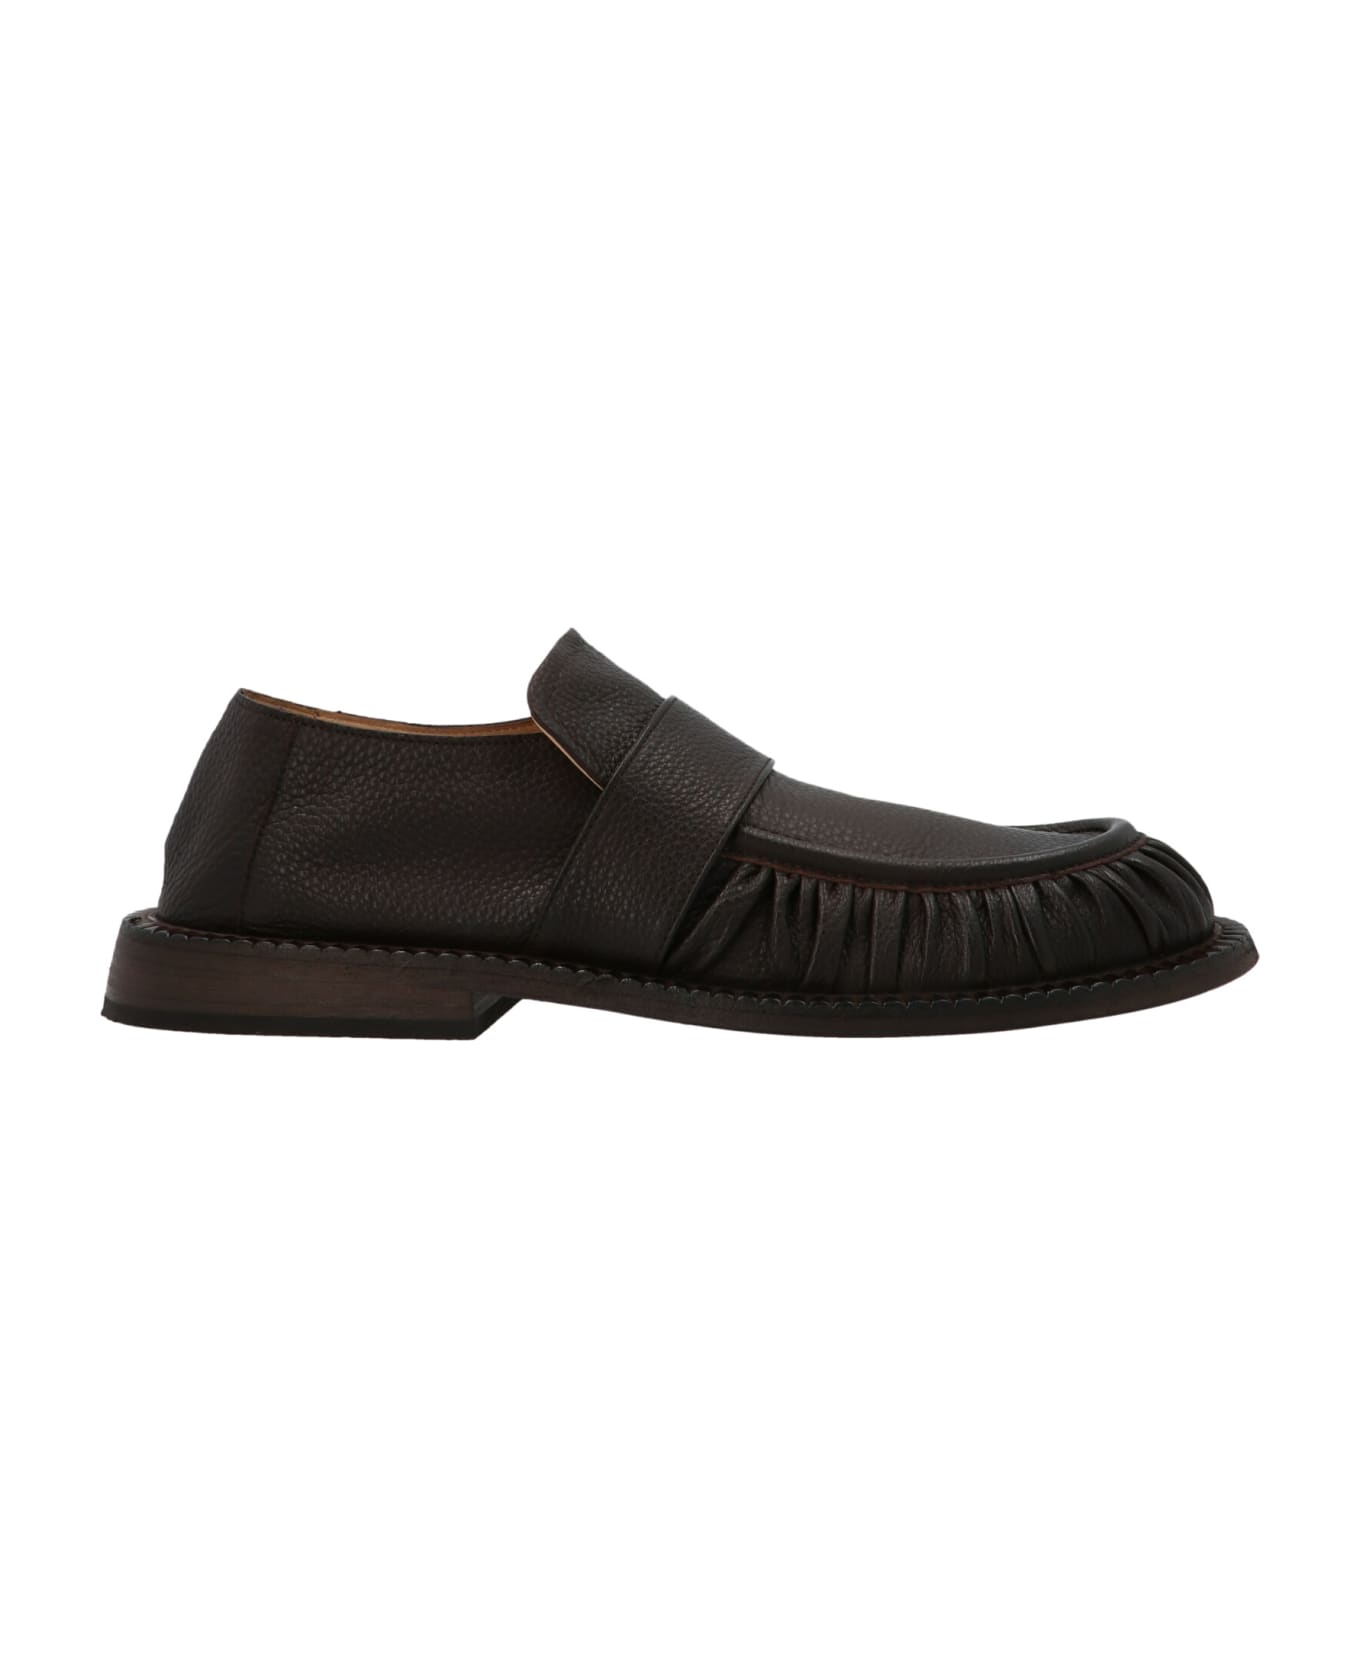 Marsell 'alluce Loafers - Brown